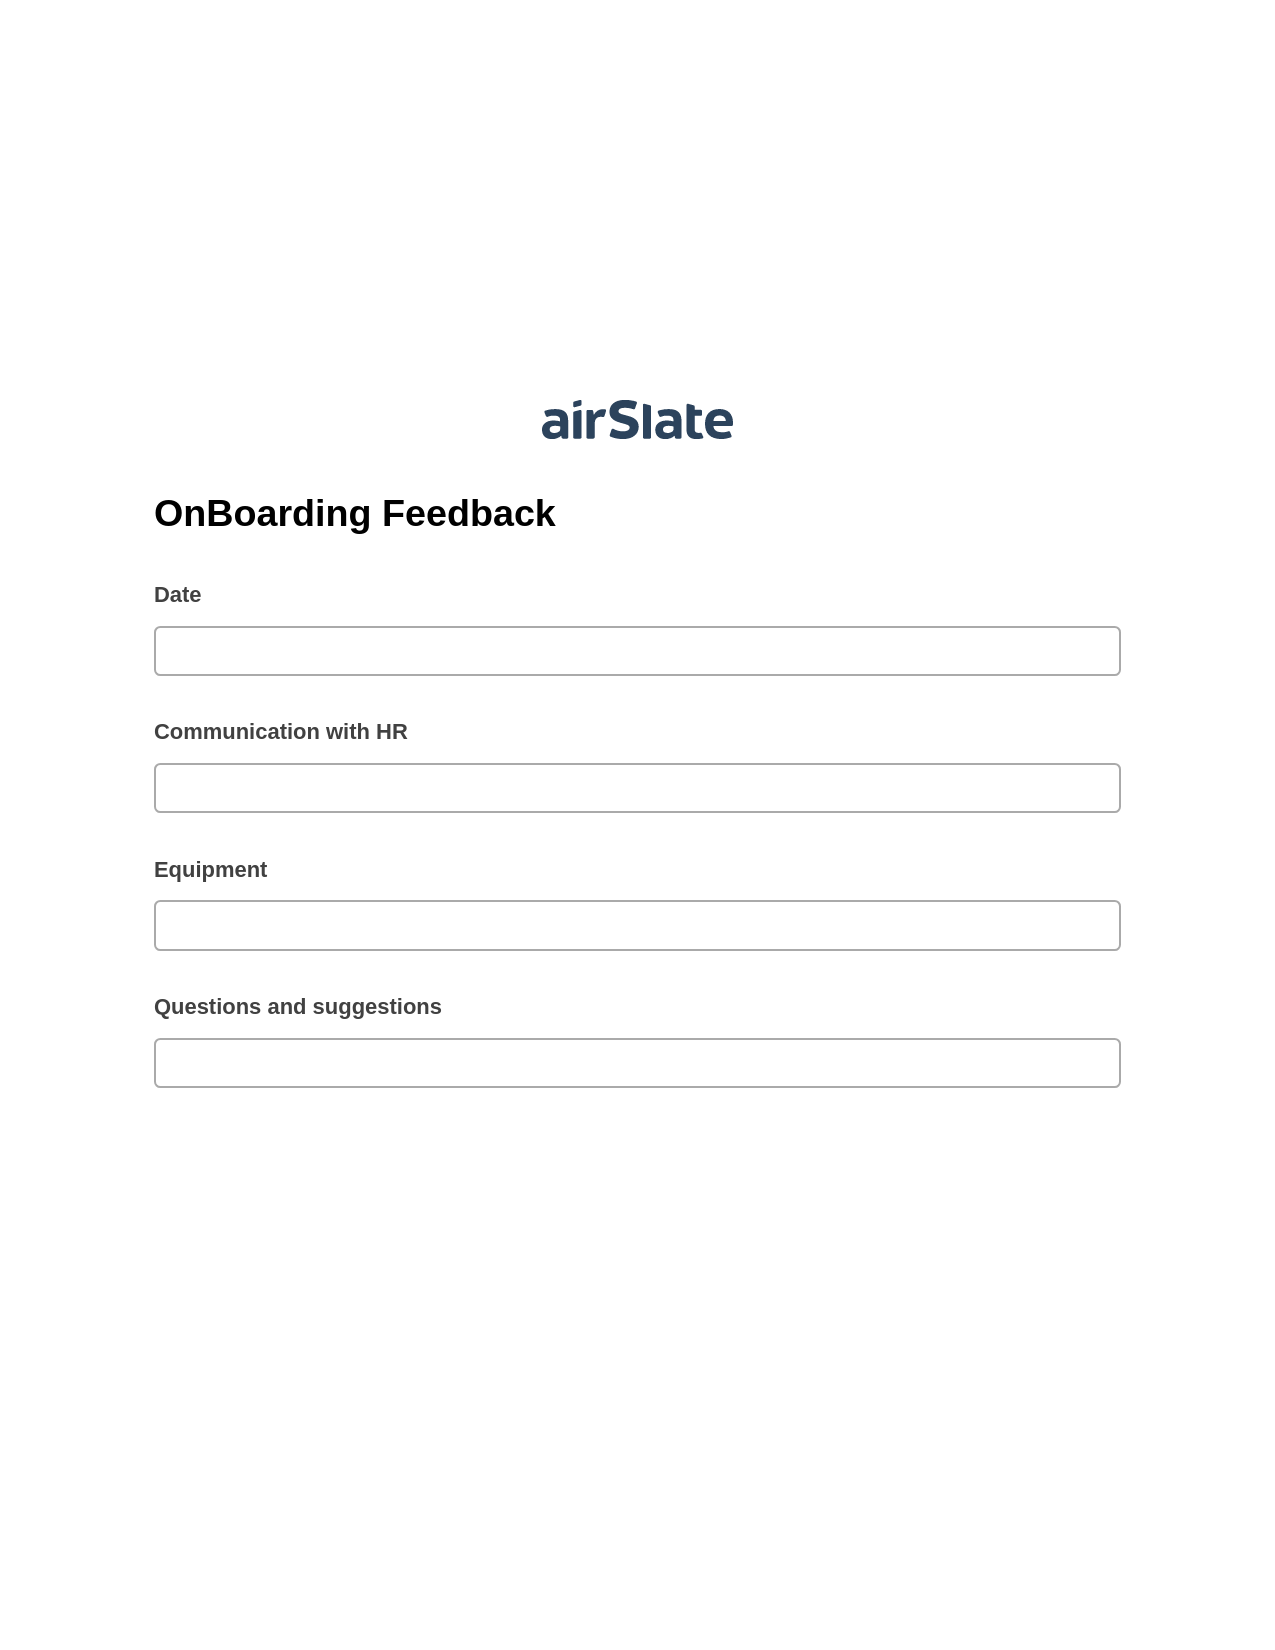 Multirole OnBoarding Feedback Pre-fill from CSV File Bot, Set Signature Type Bot, Export to Excel 365 Bot